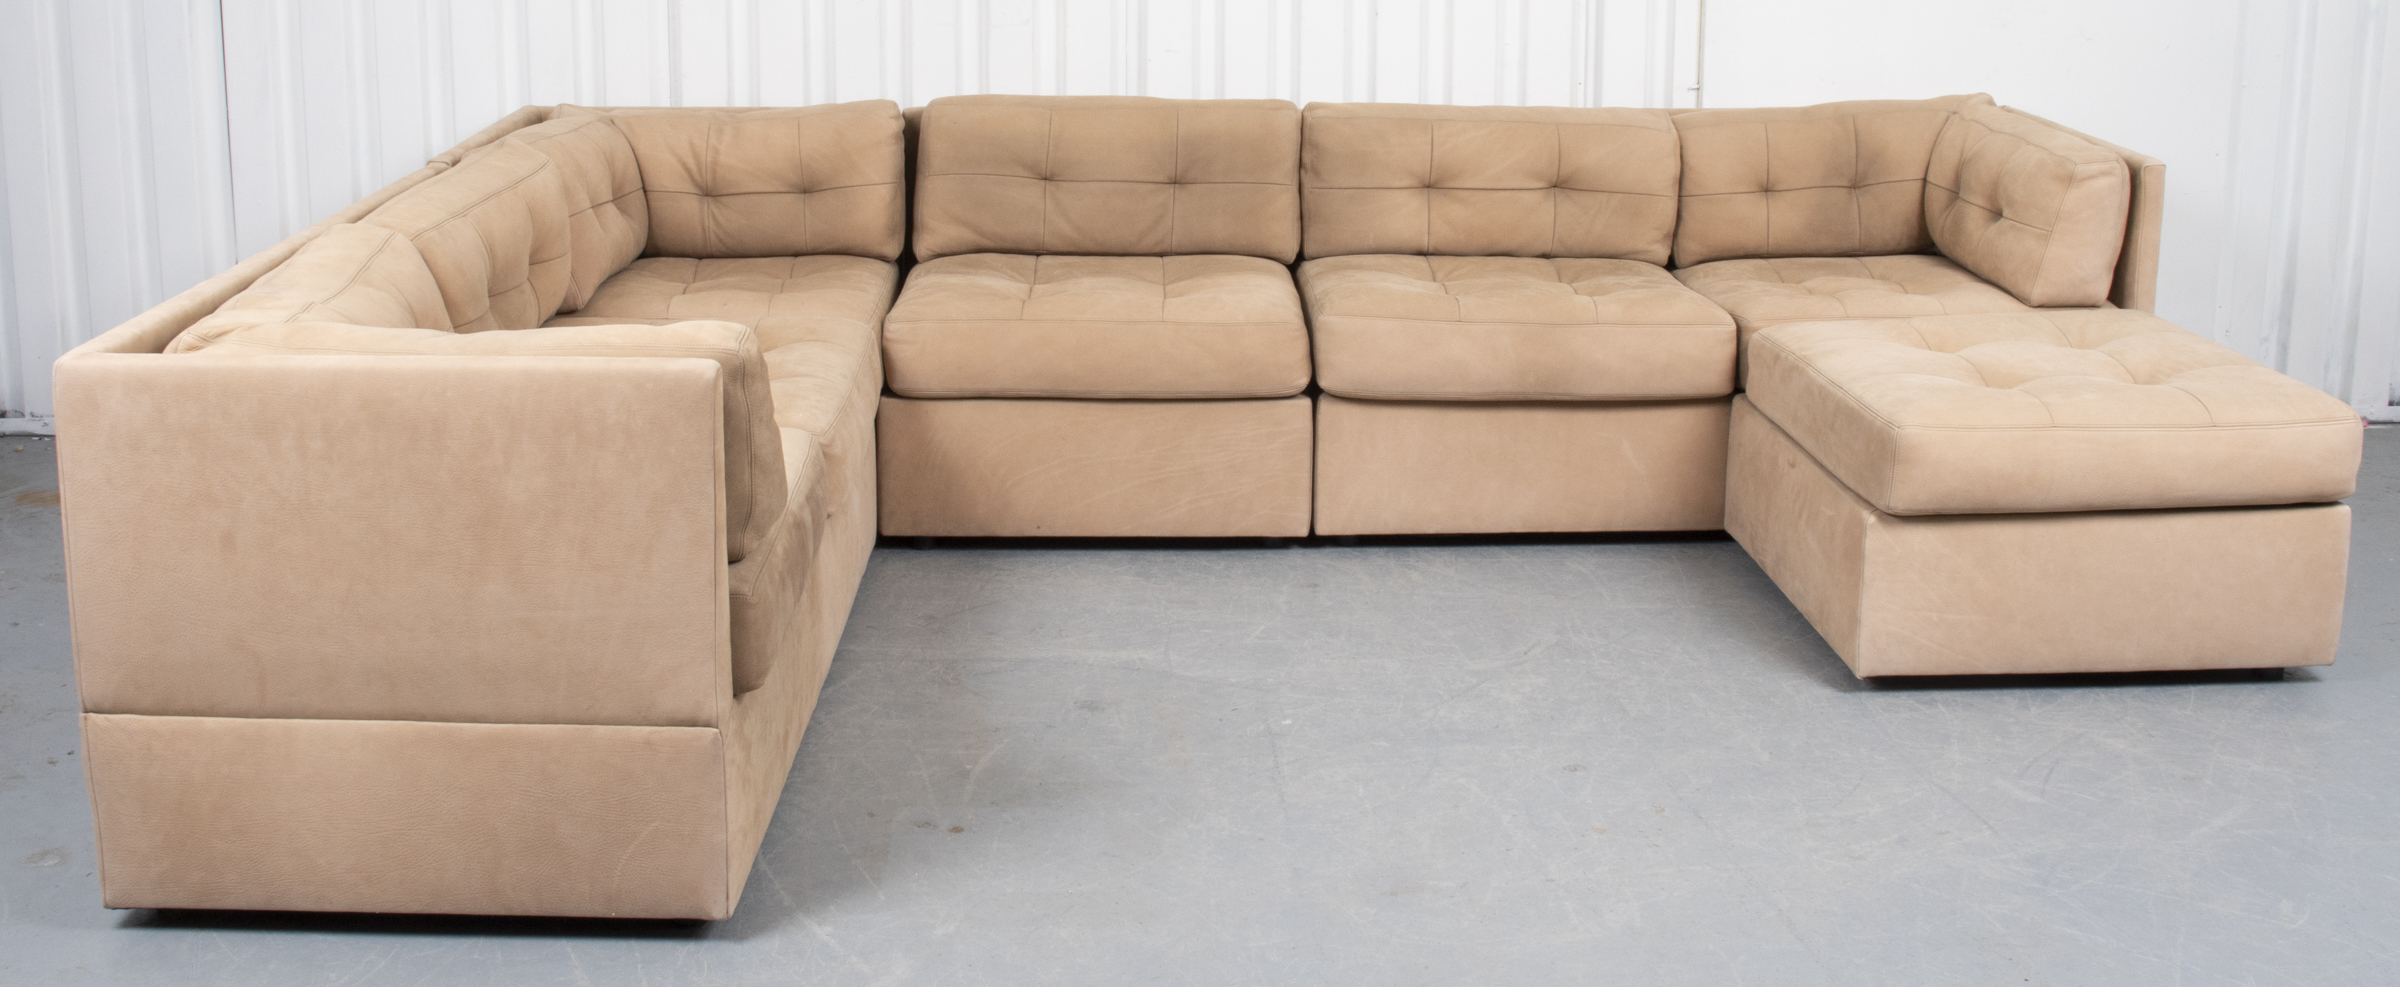 MODERN LEATHER SECTIONAL SOFA &